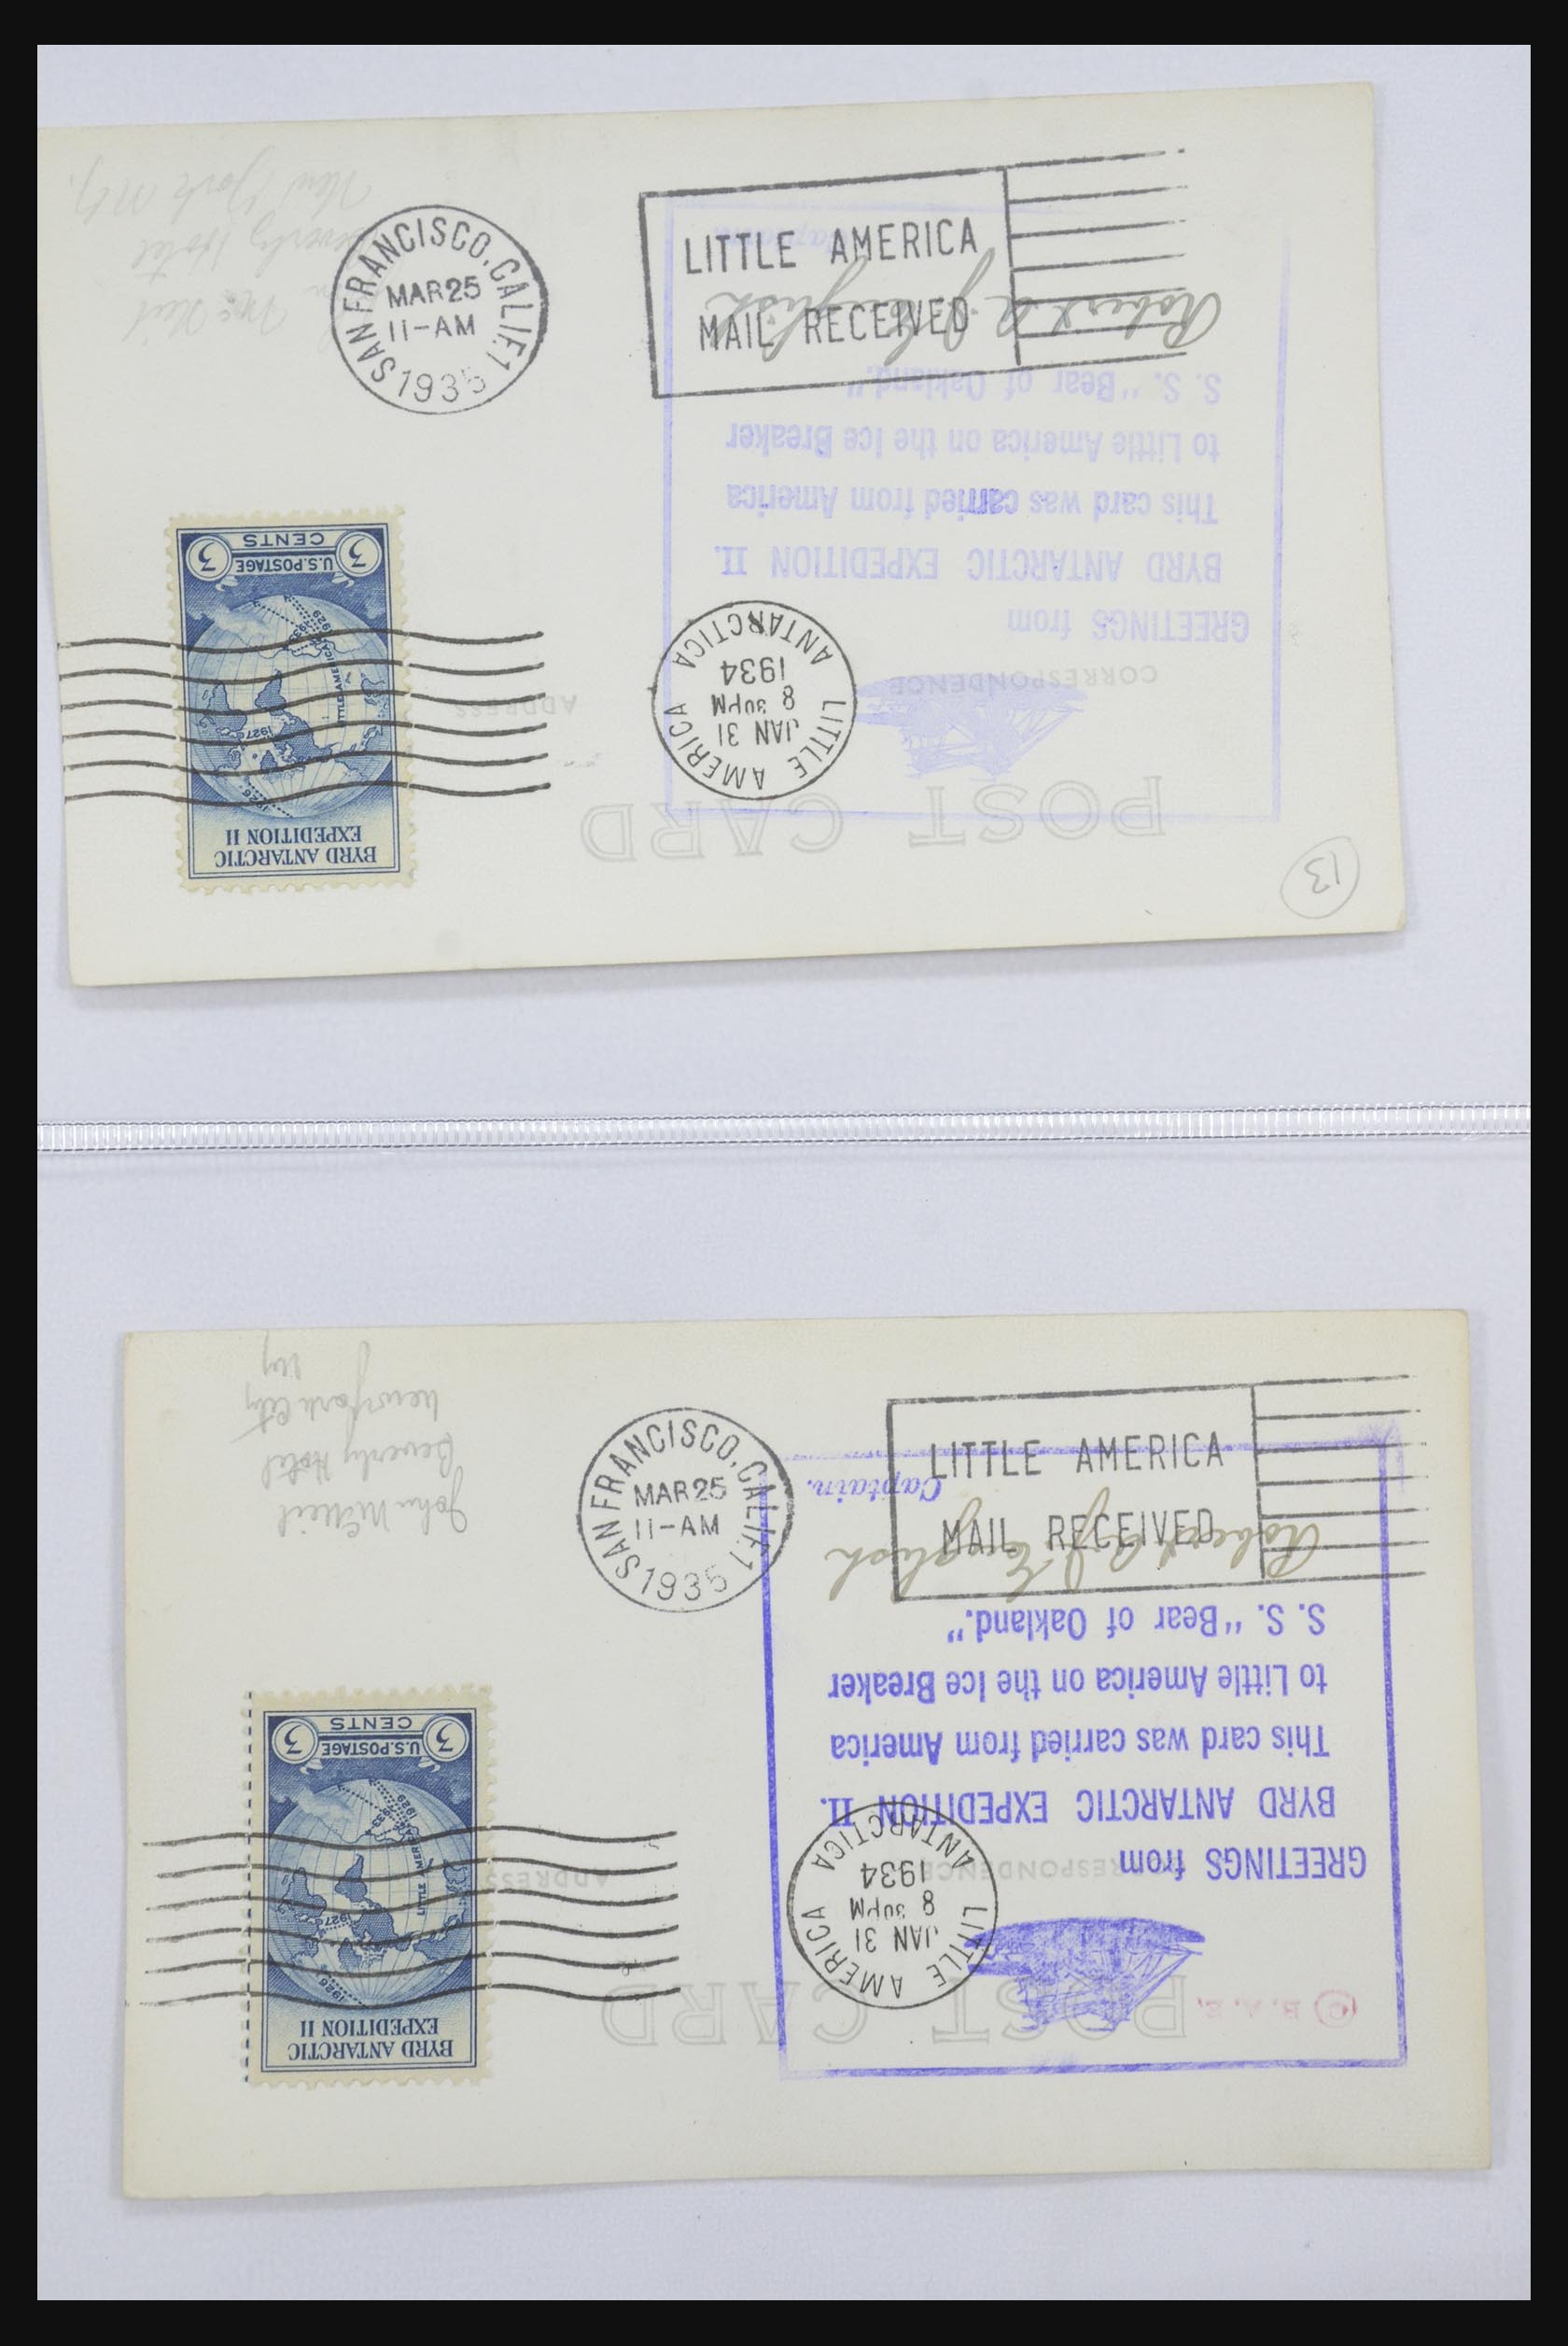 31627 028 - 31627 Byrd Antarctic Expedition 1934.